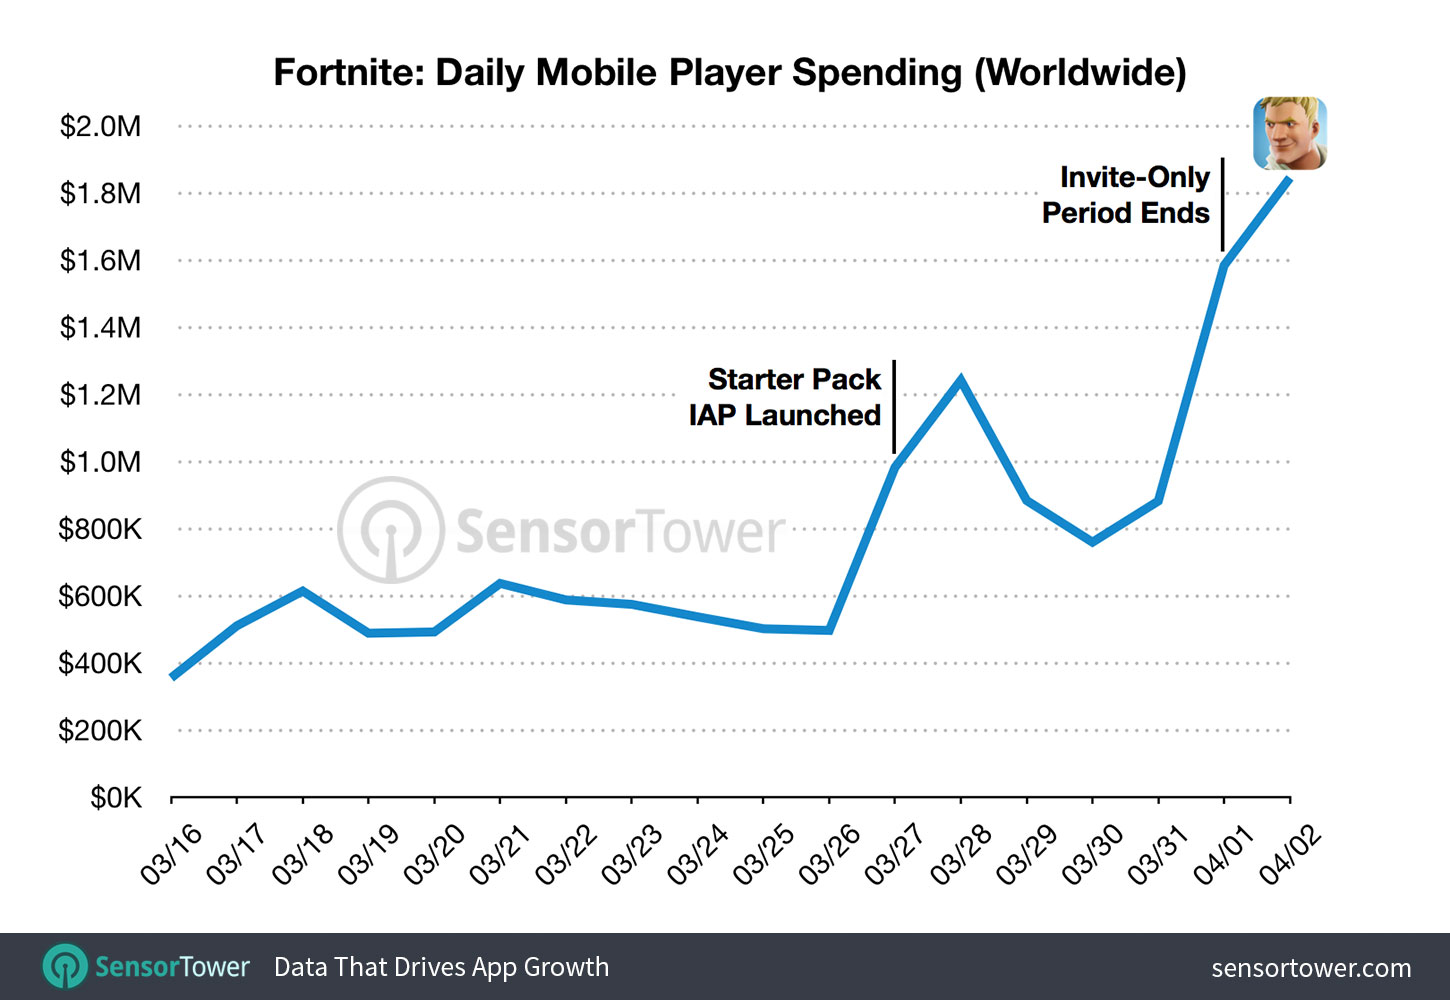 the starter pack iap also helped cause a spike in revenue while there was a dip in revenue it helped kickstart fortnite s revenue growth - make money playing fortnite